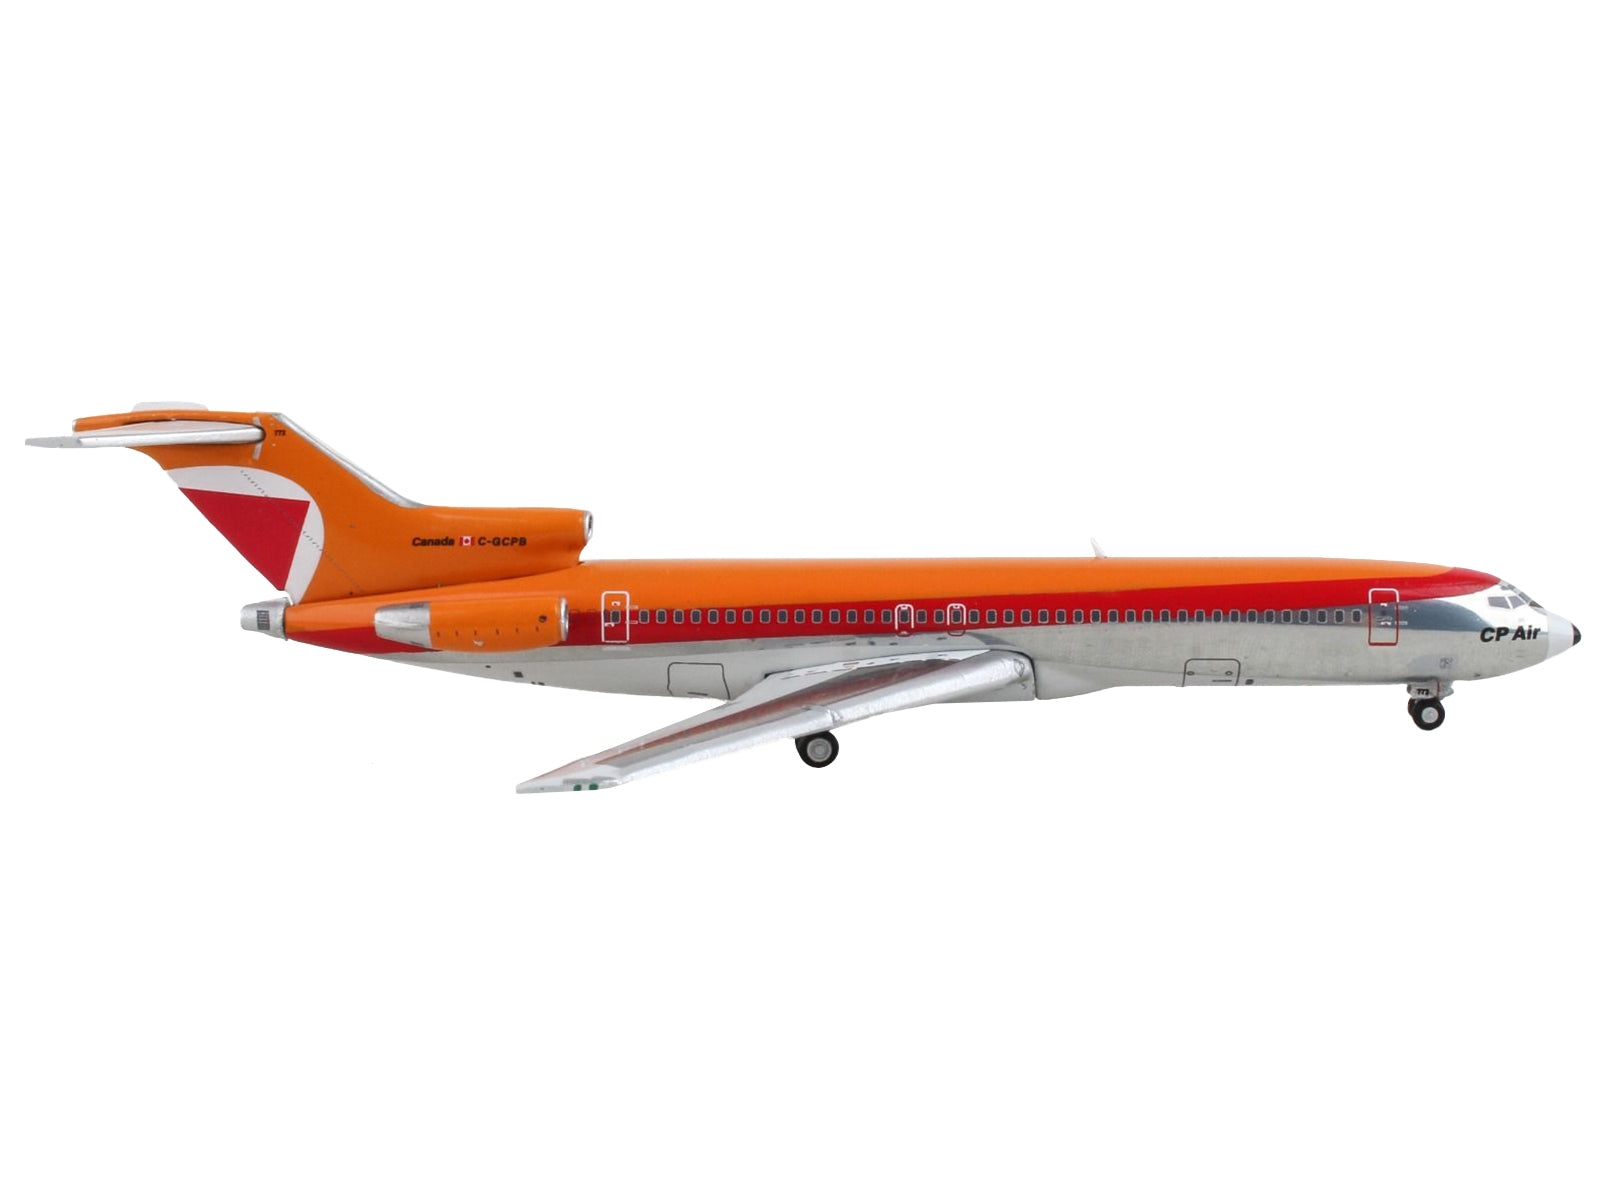 Boeing 727-200 Commercial Aircraft "CP Air" Orange and Silver with Red Stripes 1/400 Diecast Model Airplane by GeminiJets